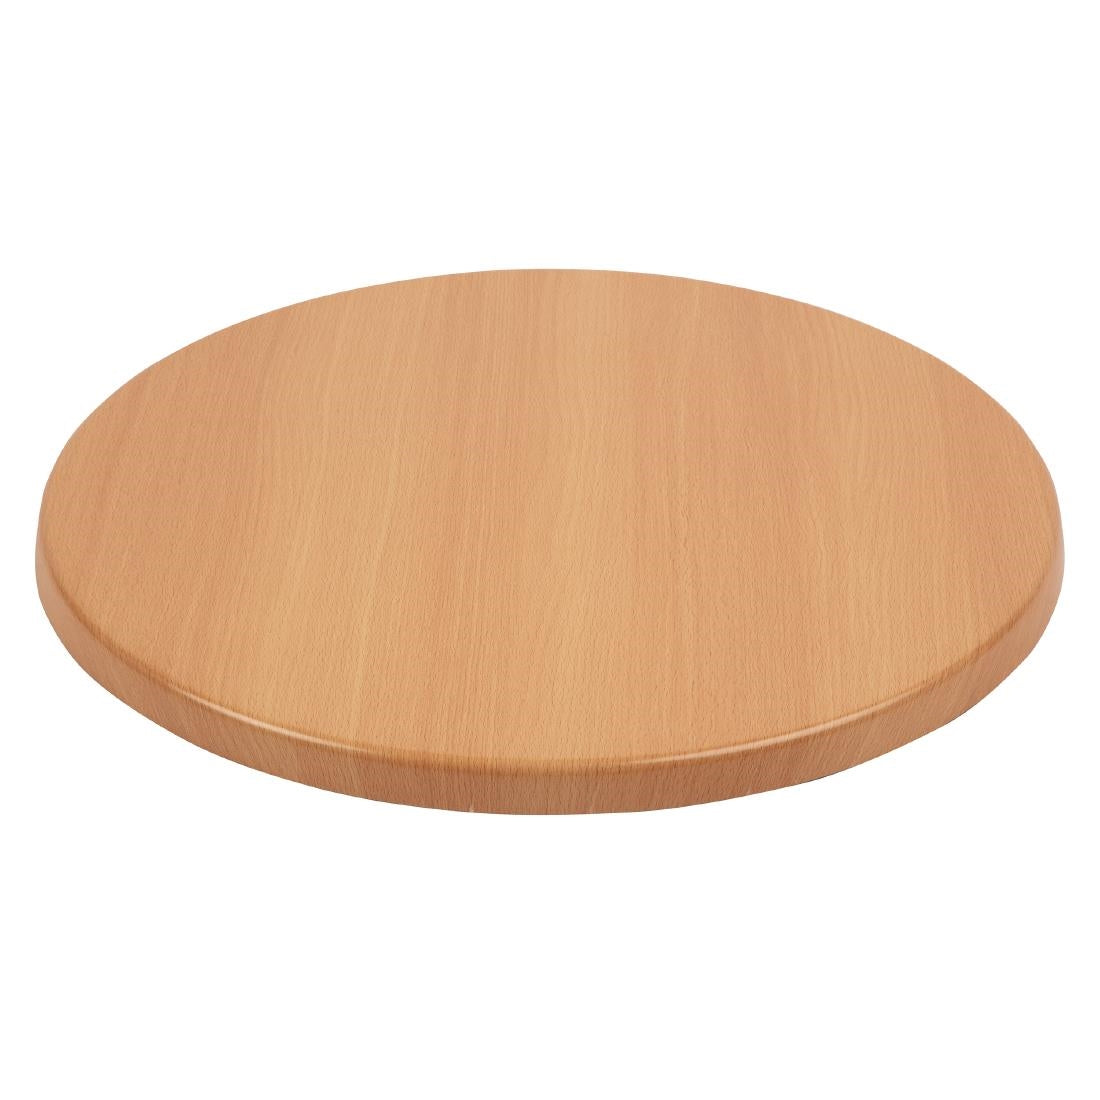 Bolero Pre-drilled Round Table Top 600mm JD Catering Equipment Solutions Ltd